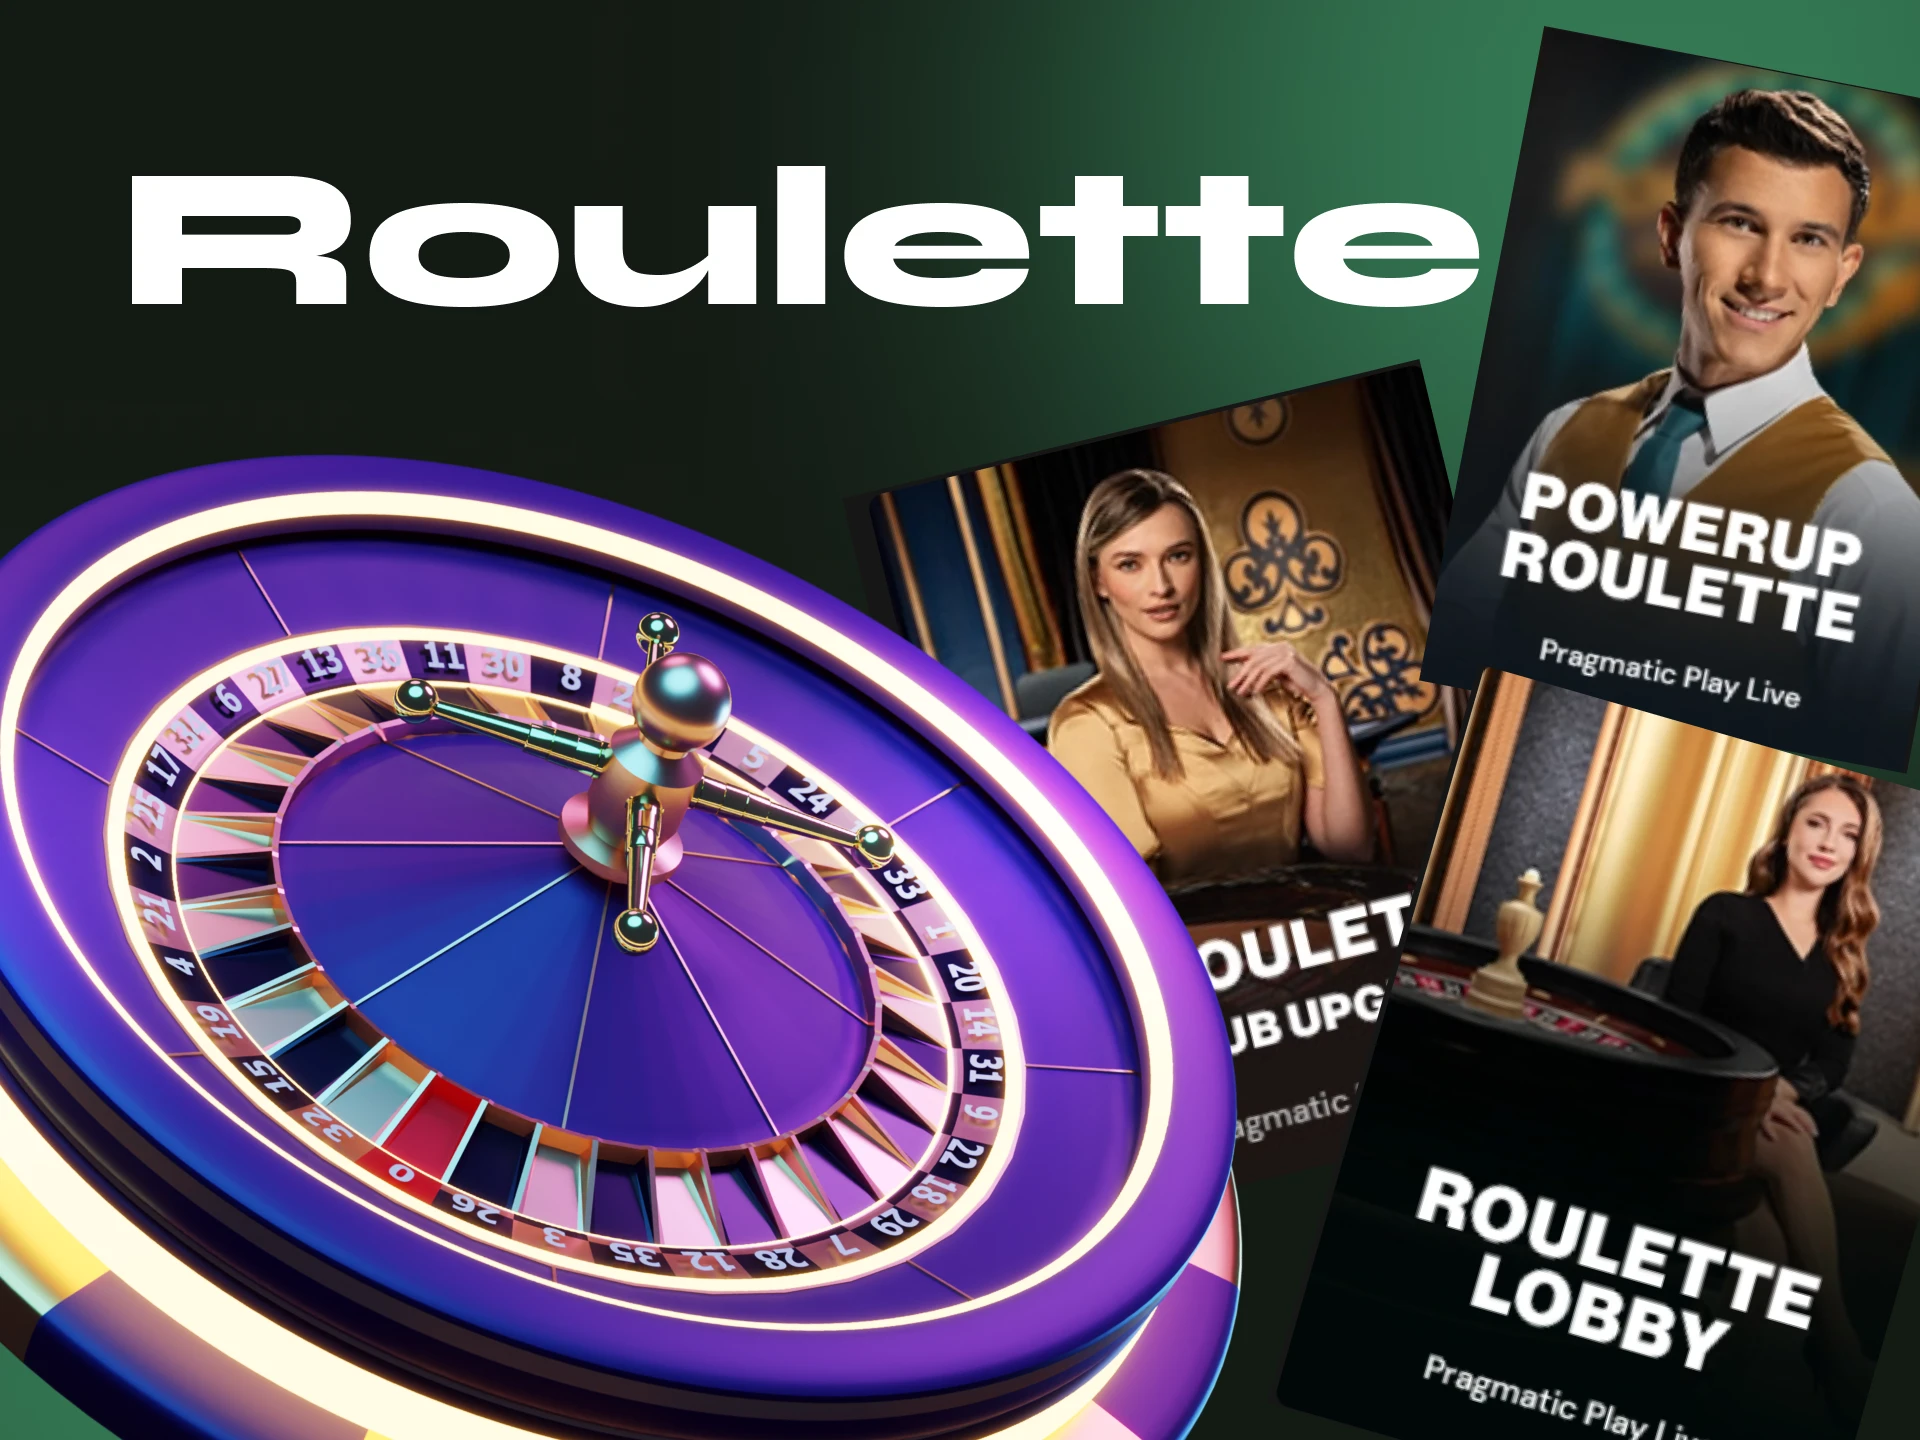 What is the player's task in the game Roulette.